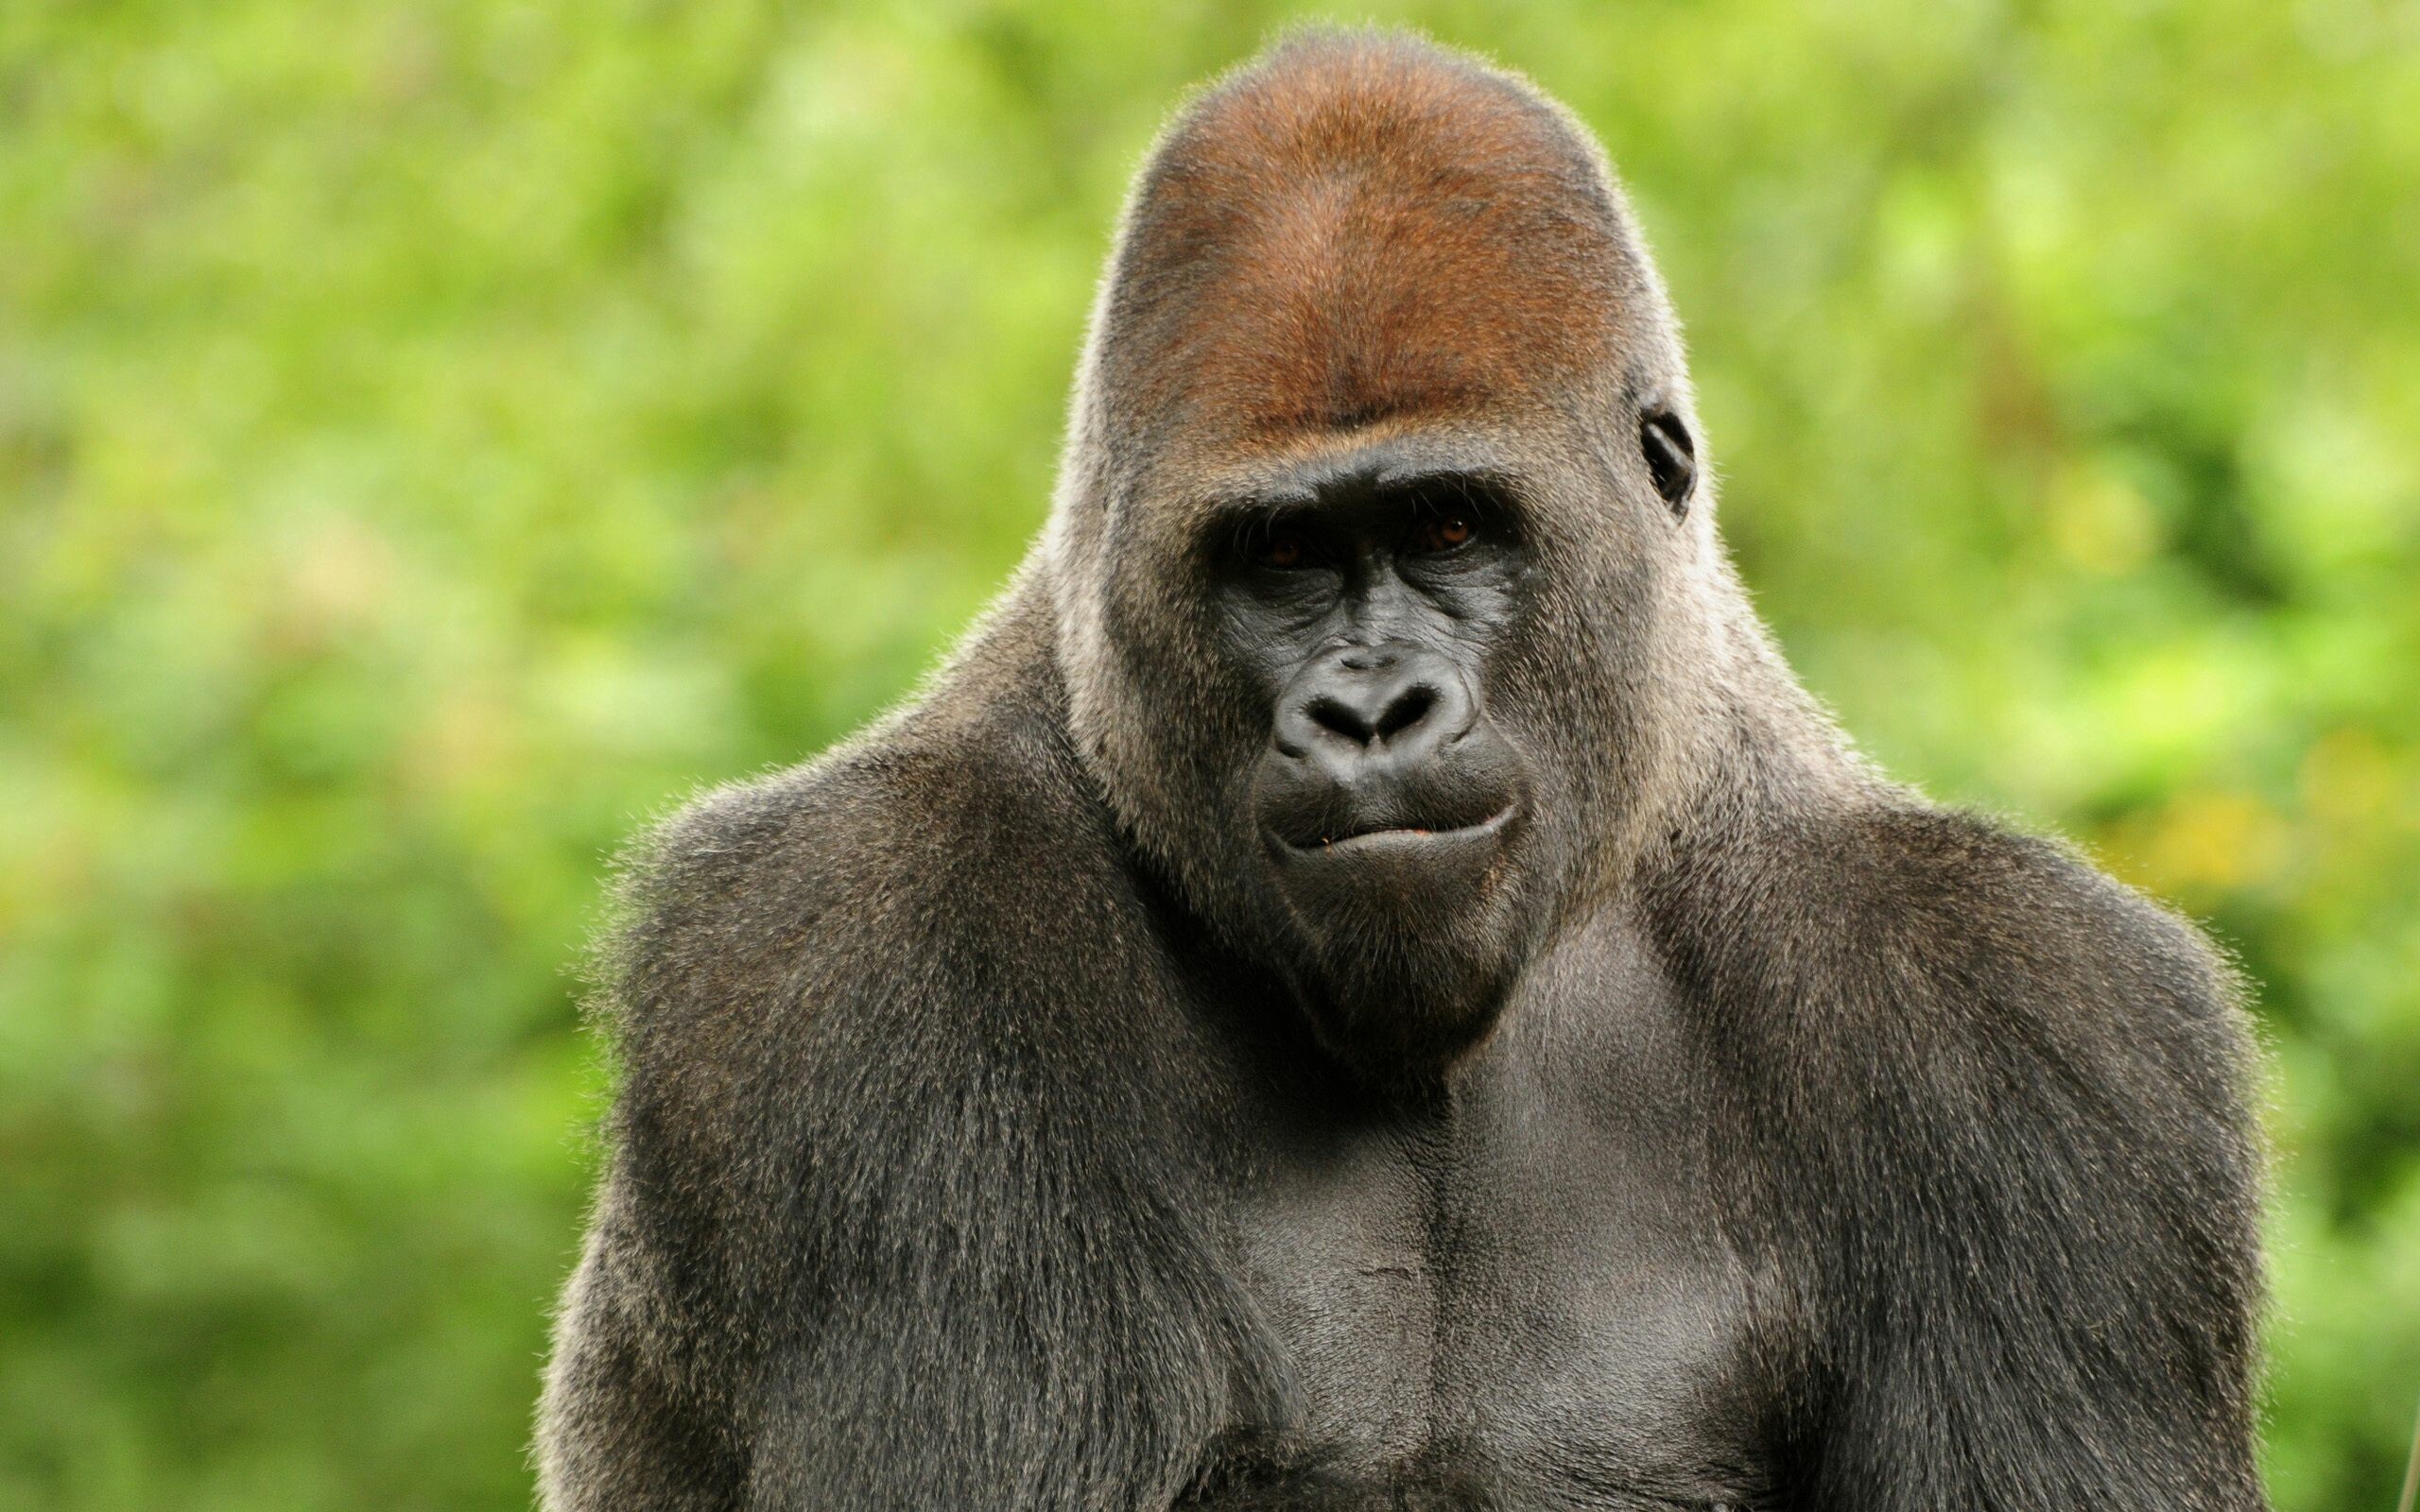 Ape: The largest of the great apes, gorillas are stocky animals with broad chests and shoulders, large, human-like hands, and small eyes set into hairless faces. 2560x1600 HD Wallpaper.